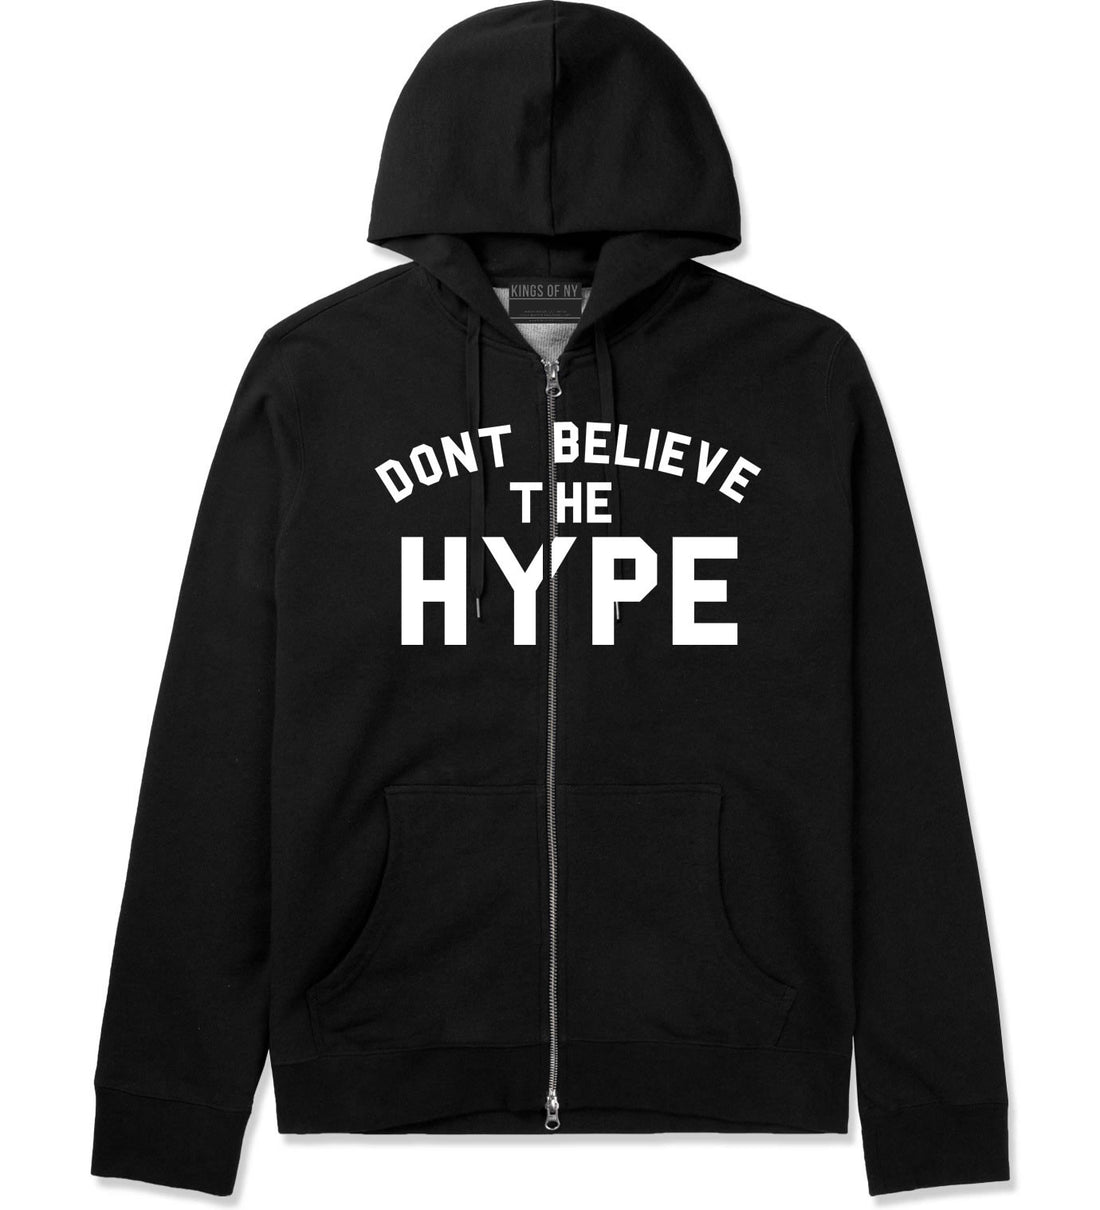 Don't Believe The Hype Zip Up Hoodie in Black By Kings Of NY